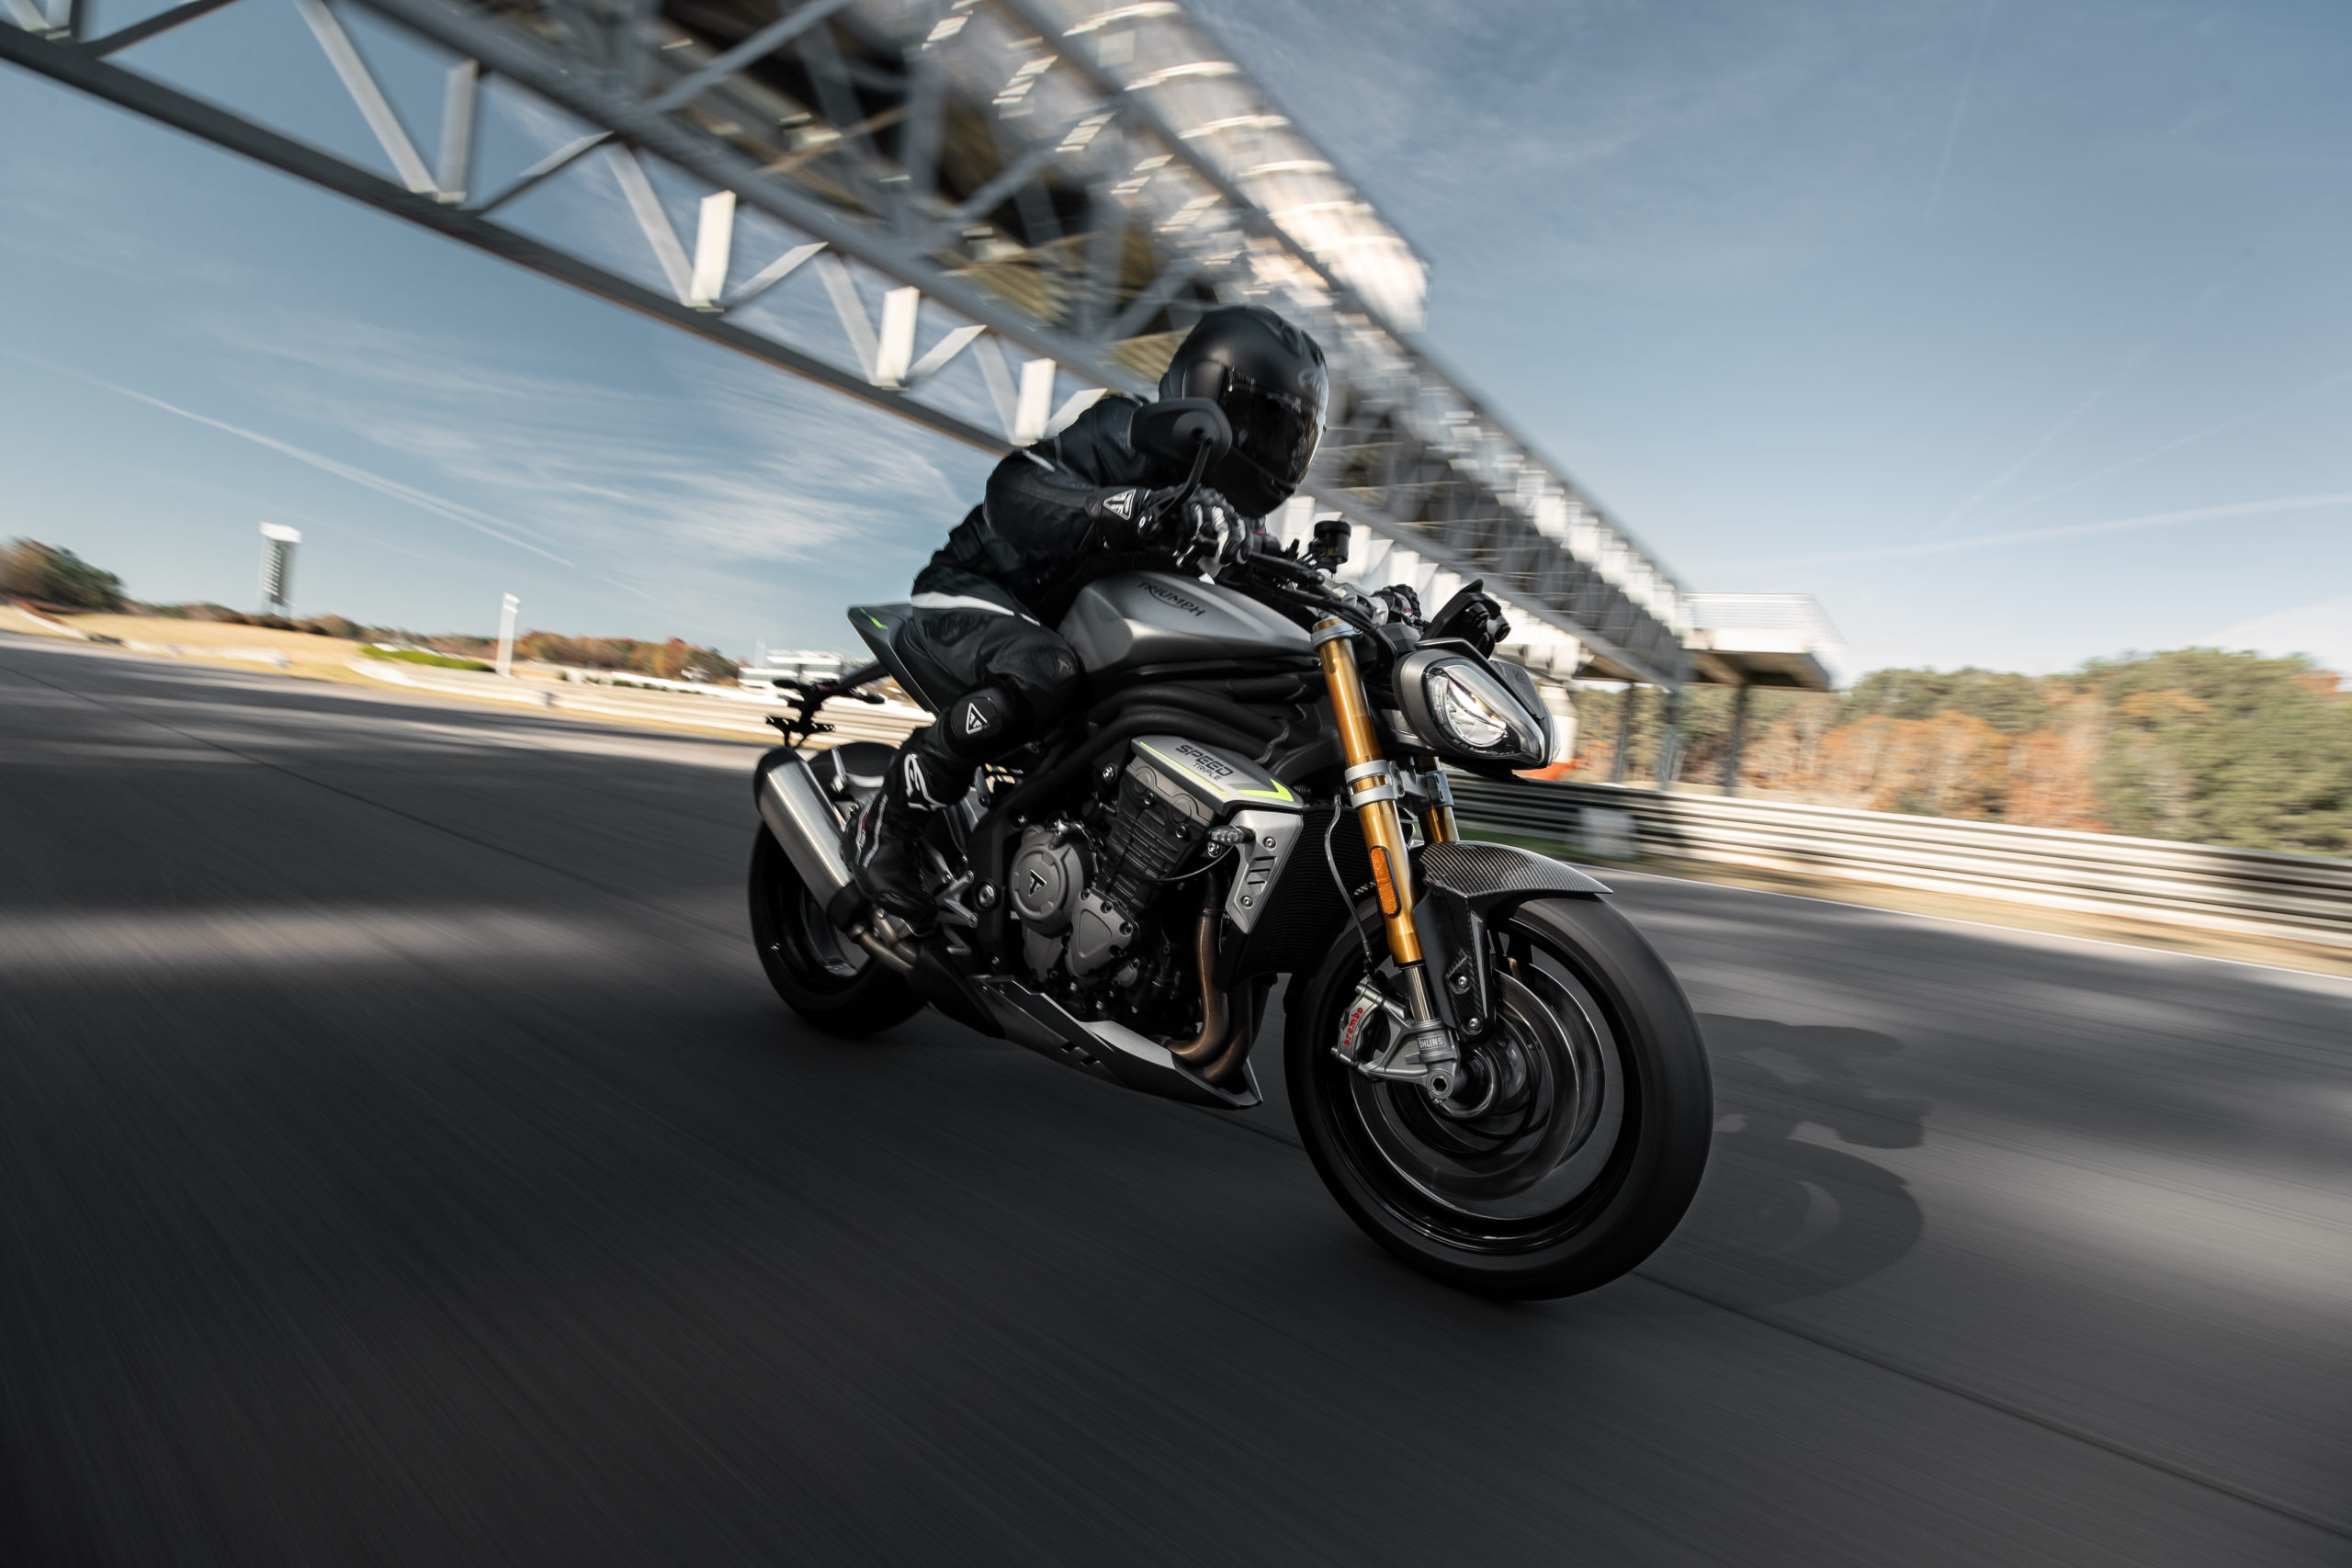 Triumph Speed Triple, 2021 lineup, High-performance motorcycles, Autowise review, 2560x1710 HD Desktop